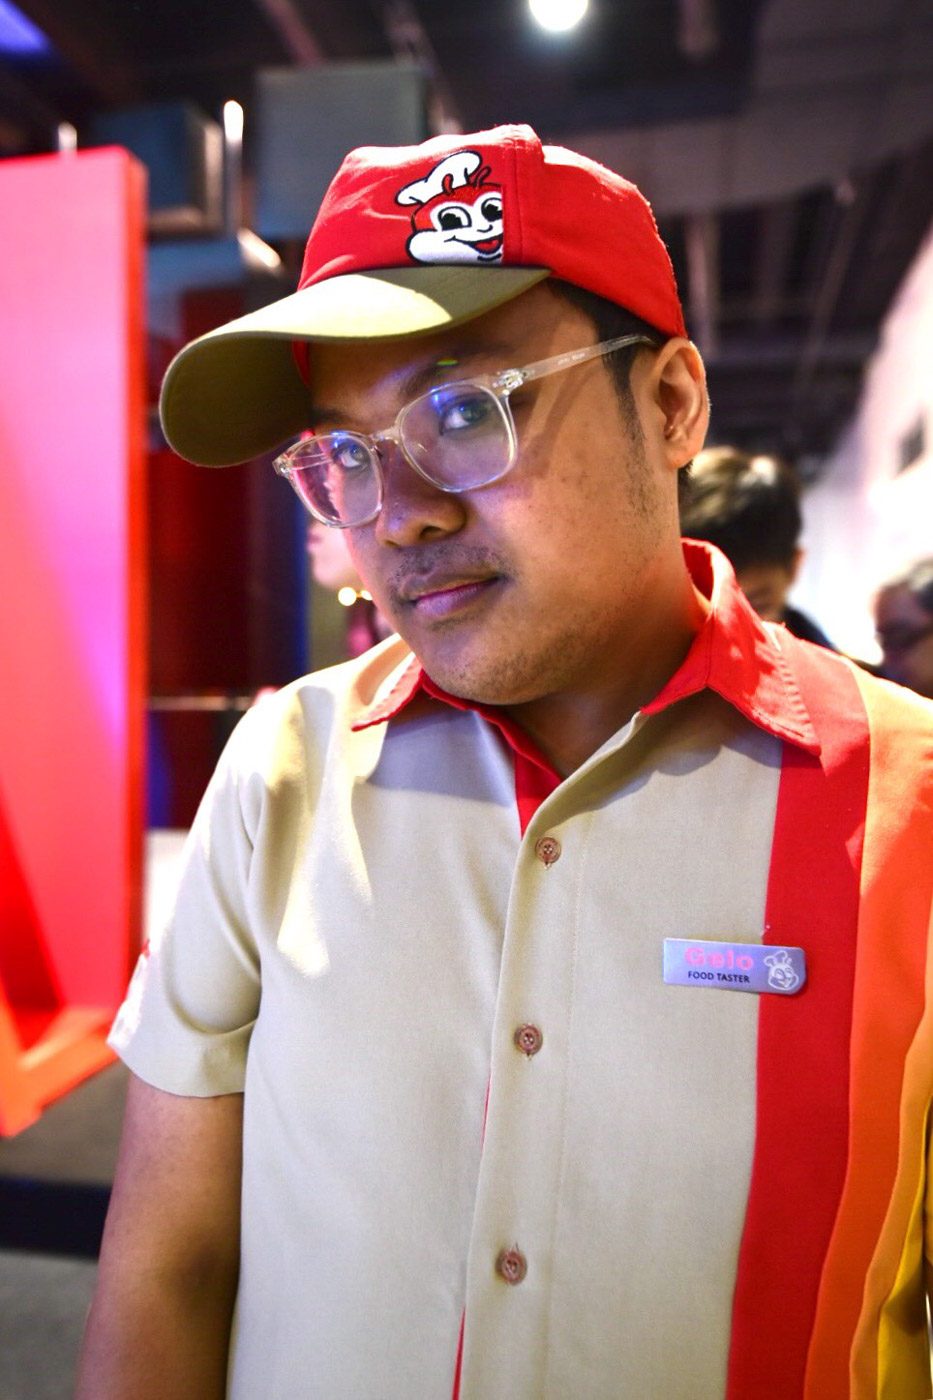 FOOD TASTER. A Jollibee hat, shirt, and a pin that says 'Food Taster' is part of his costume. 